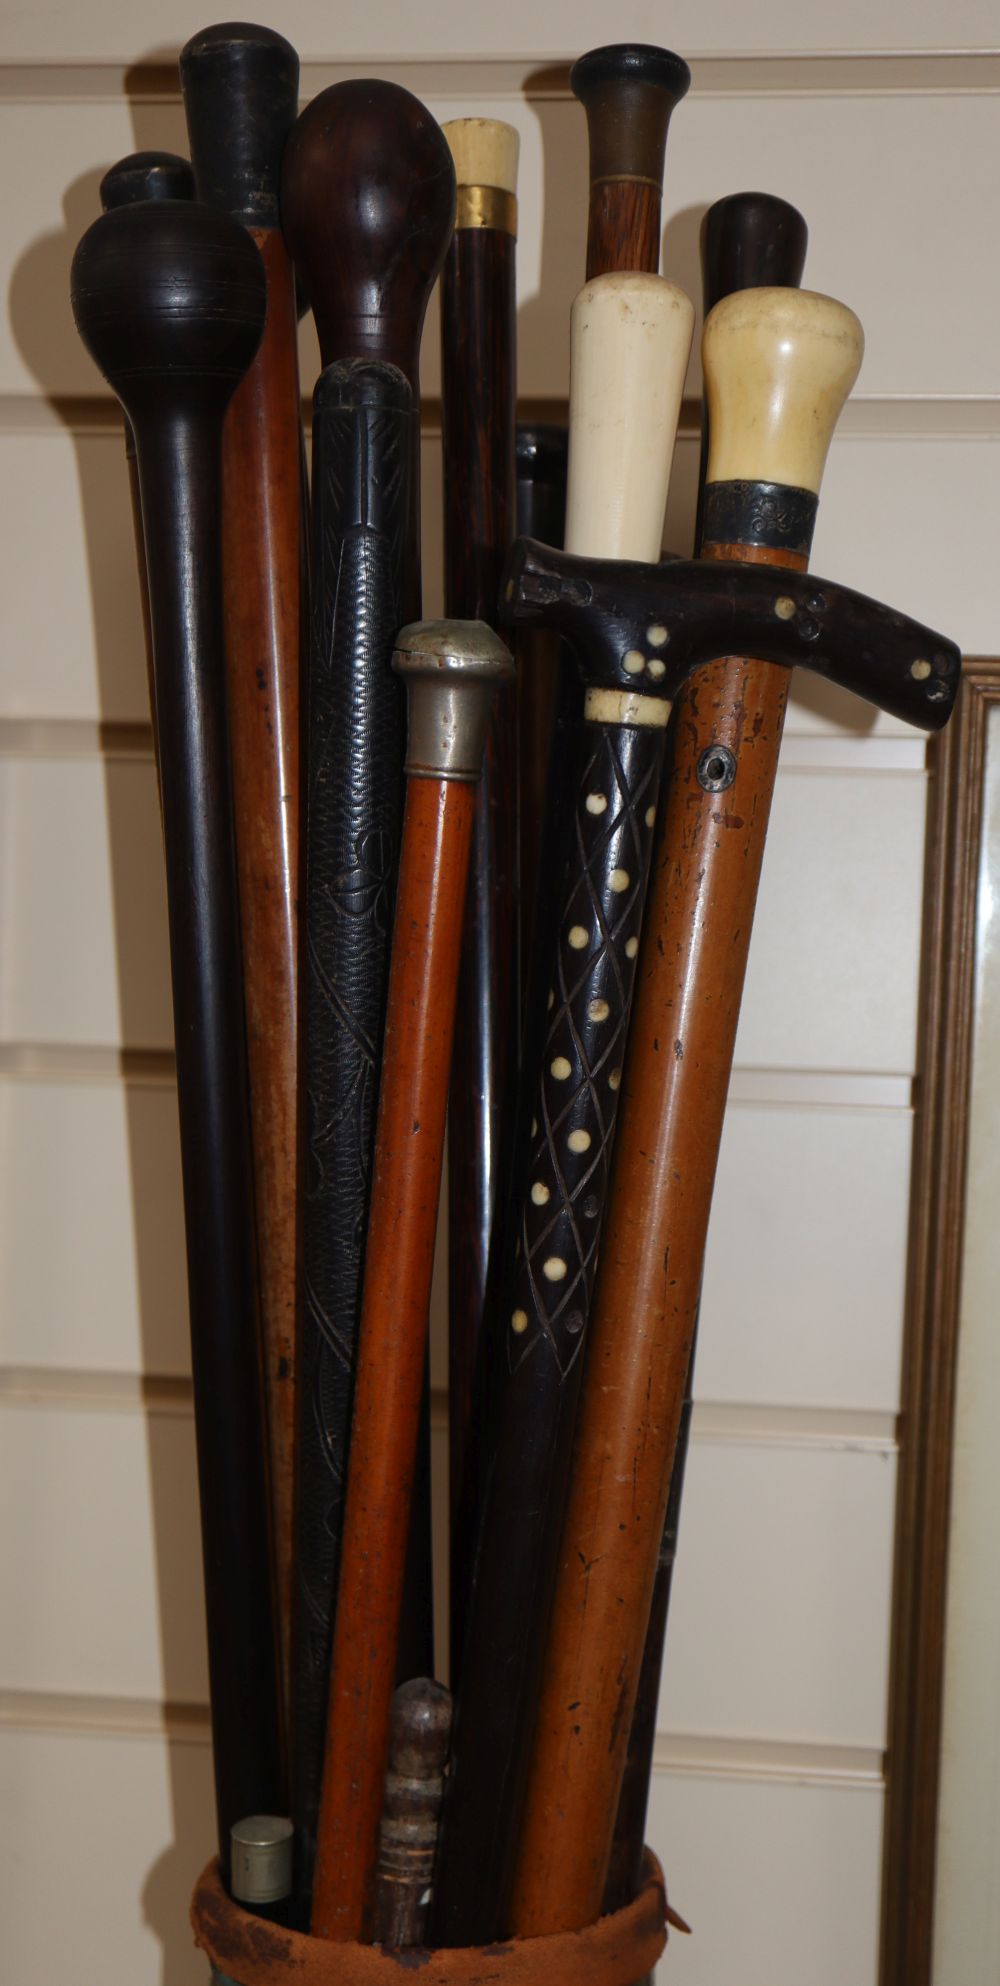 A group of walking canes, some with silver or ivory handles, in an artillery shell case stand